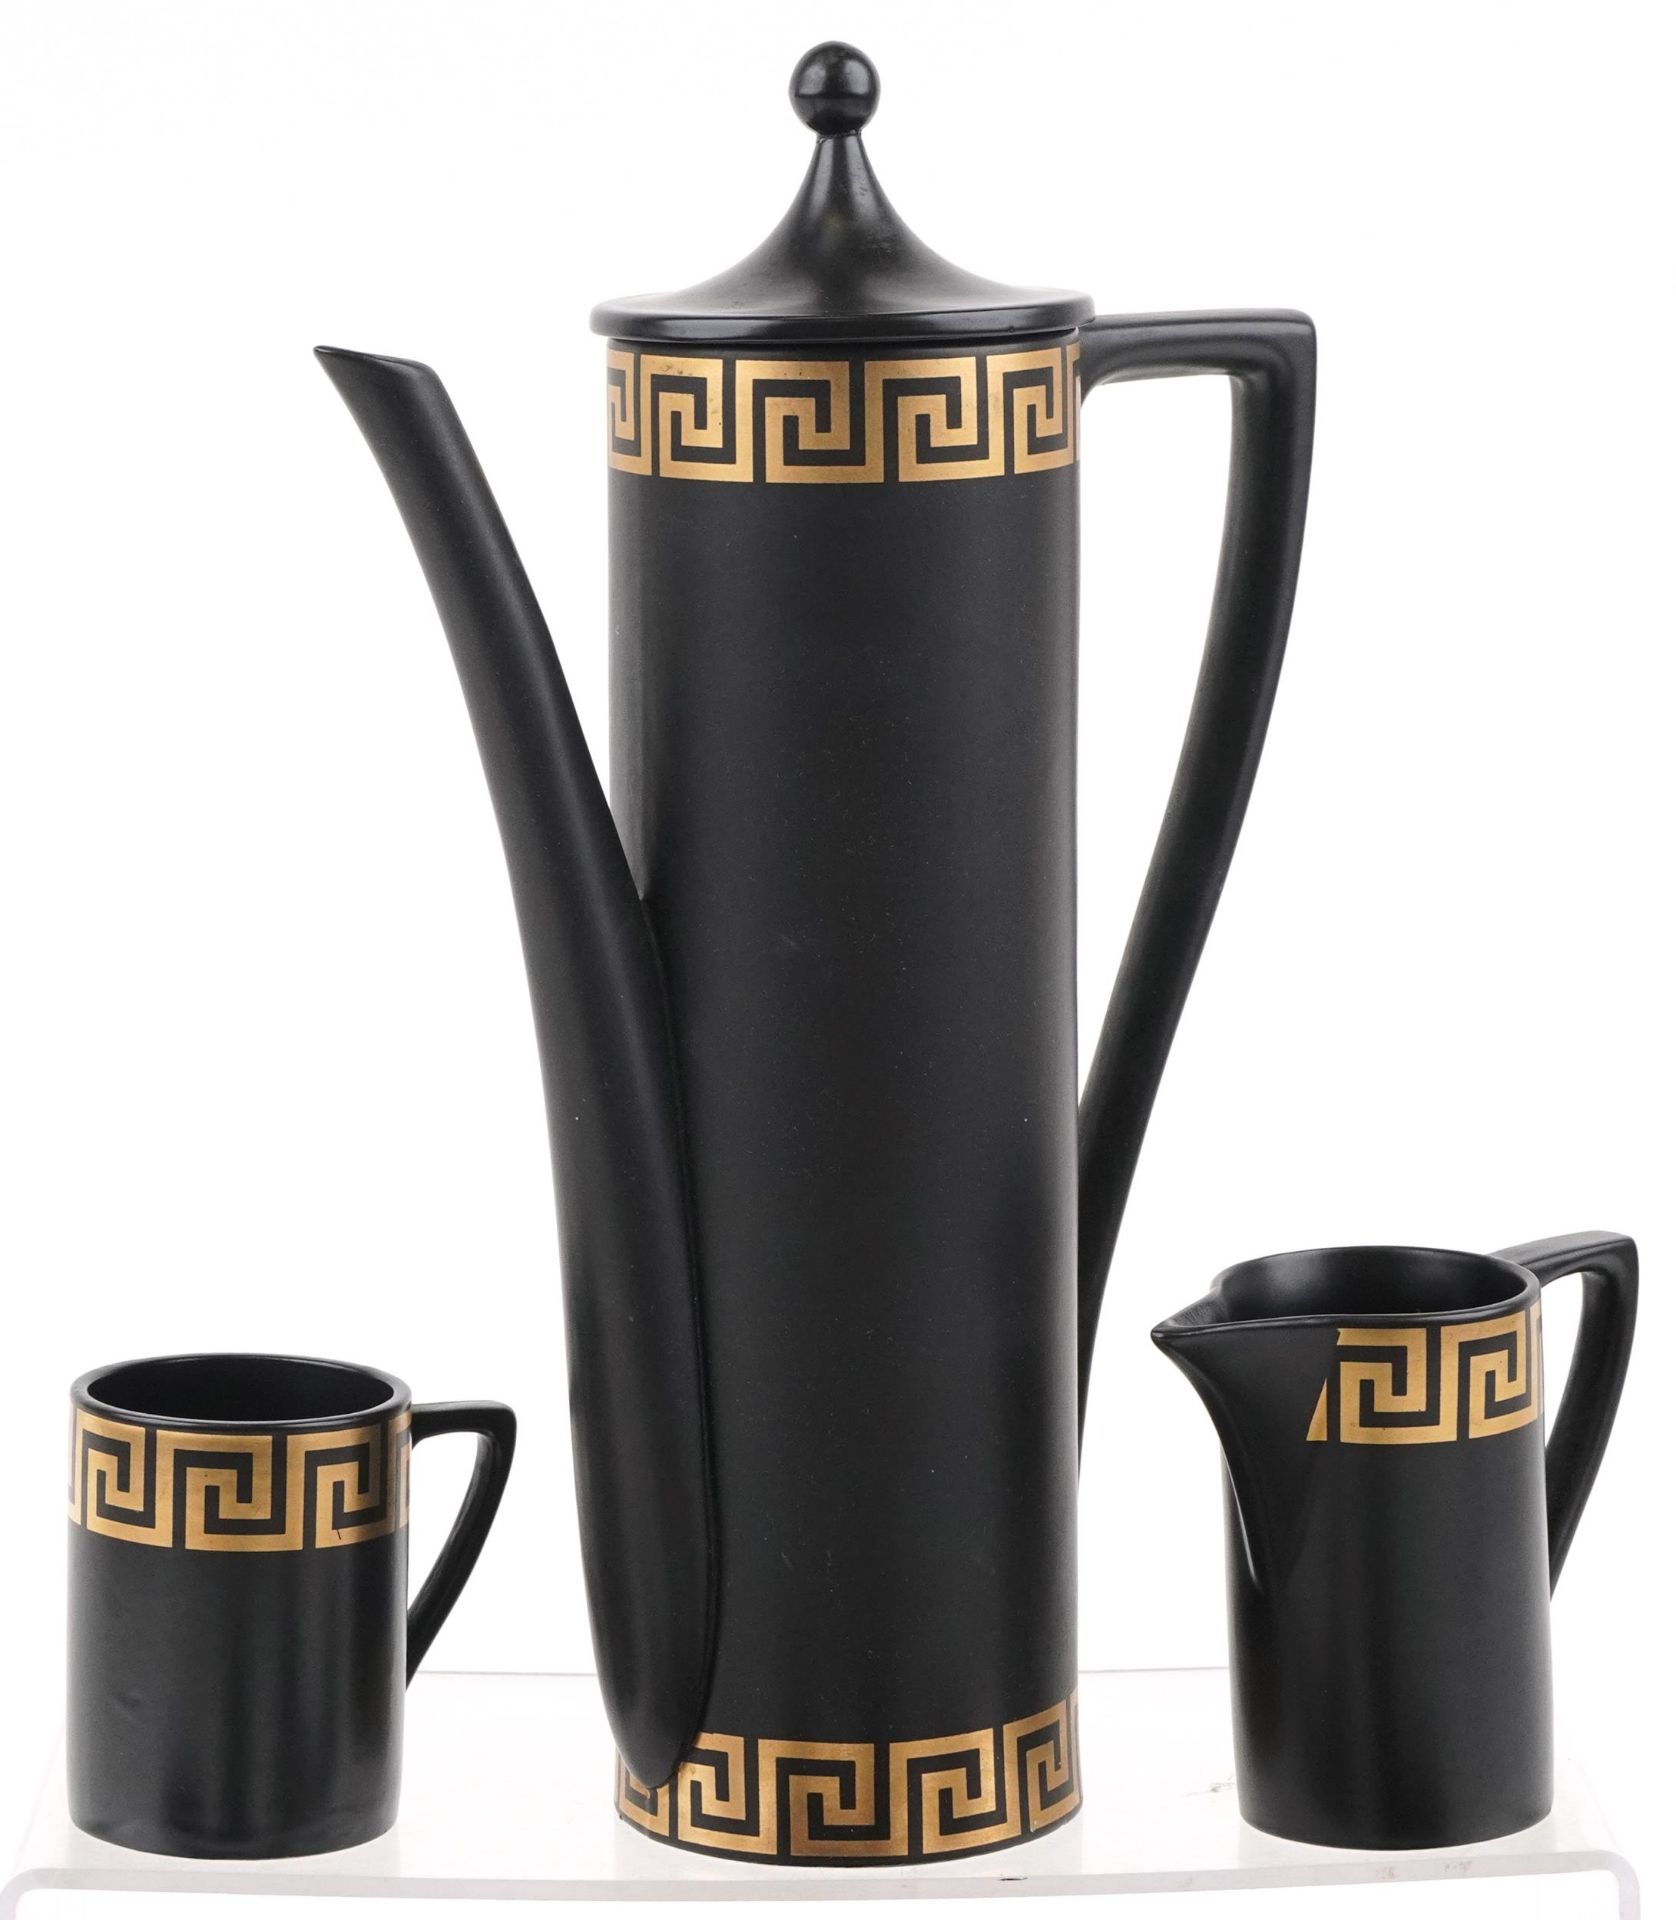 Mid century Portmeirion Greek key six place coffee service designed by Susan Williams-Ellis, the - Image 2 of 4